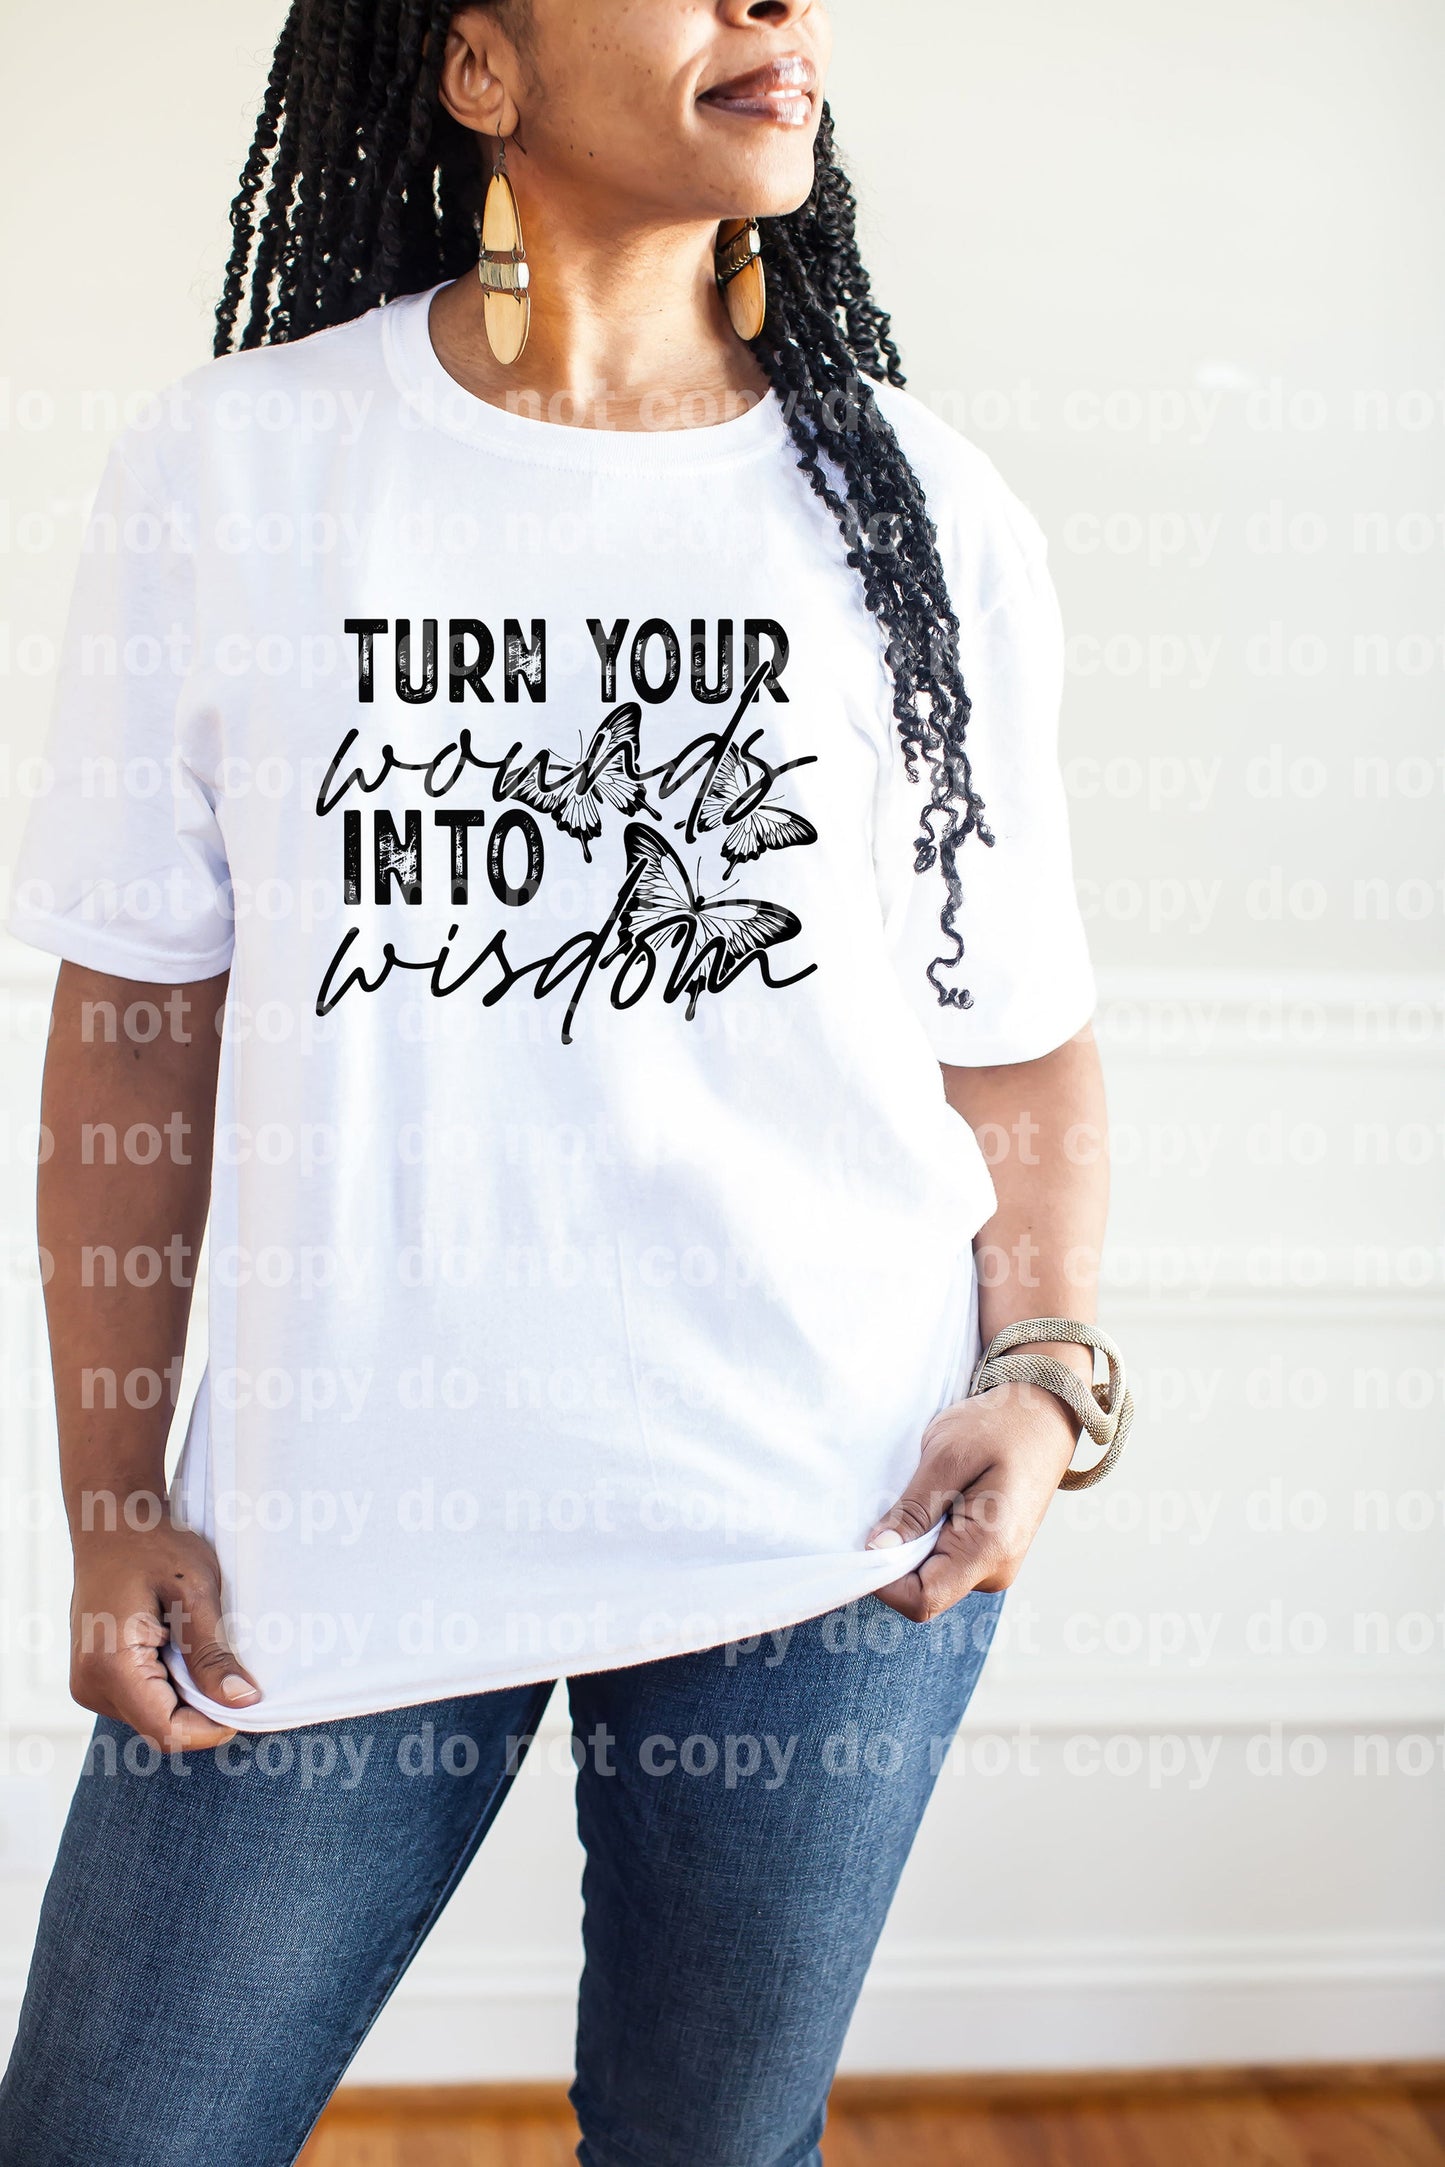 Turn Your Wounds Into Wisdom Dream Print or Sublimation Print